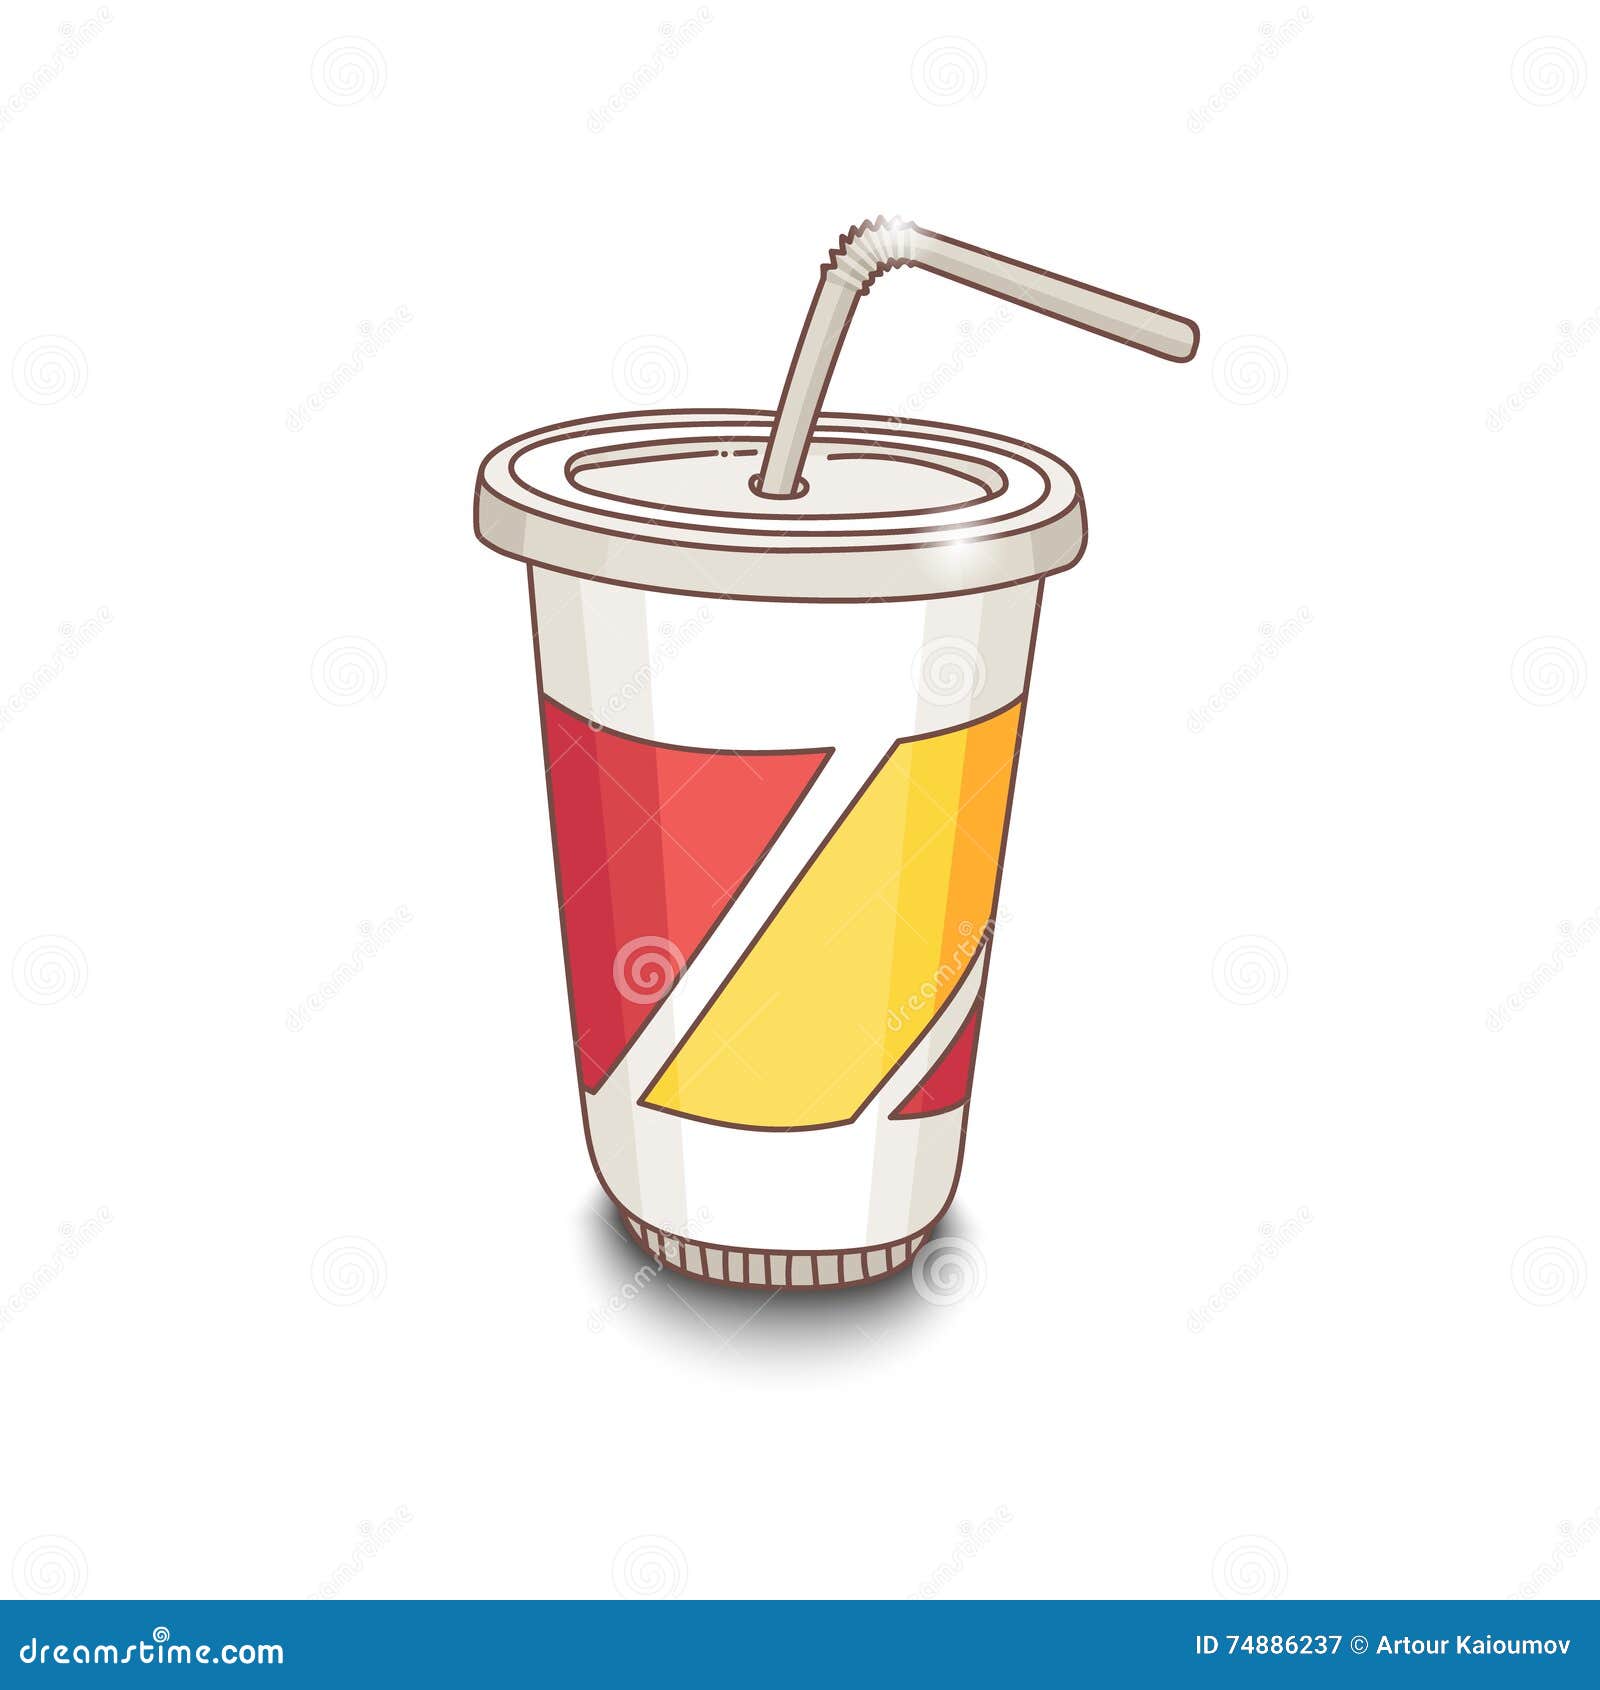 Cute Hand-drawn Cartoon Style Cup with Drink. Shadow on White Background.  Stock Vector - Illustration of container, paper: 74886237